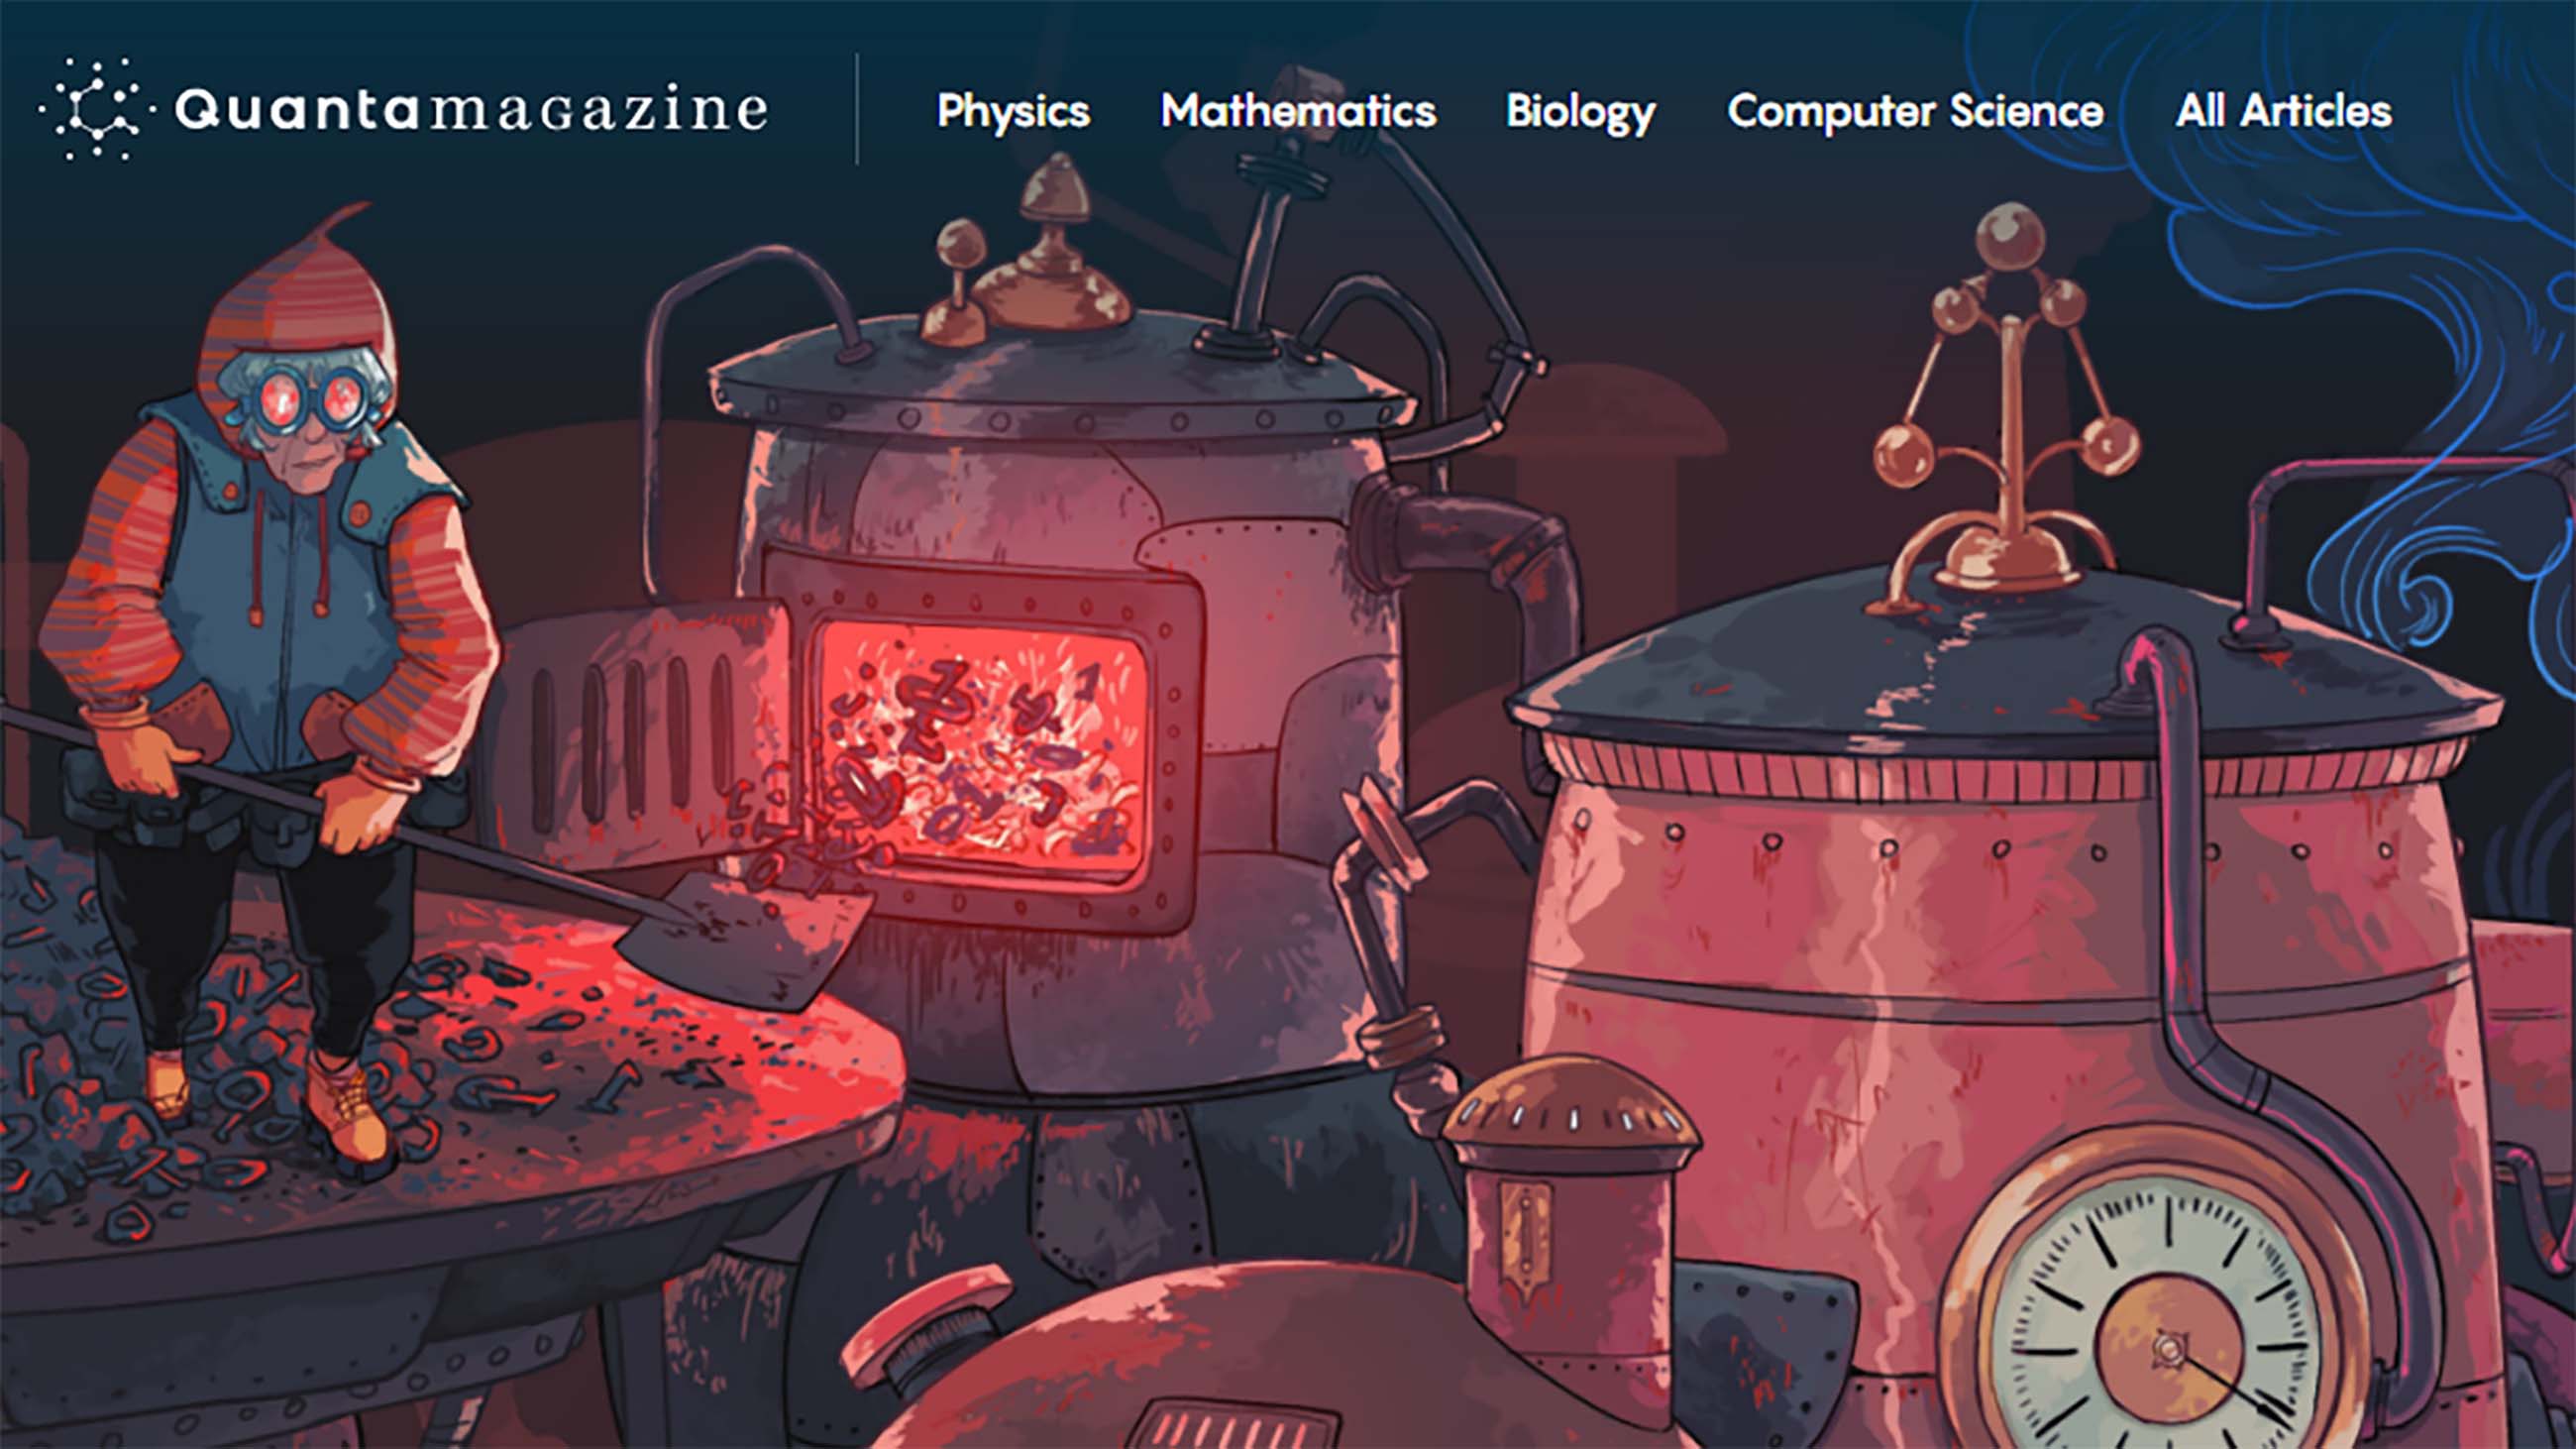 Quanta, the science magazine for über-geeks, has received a makeover.